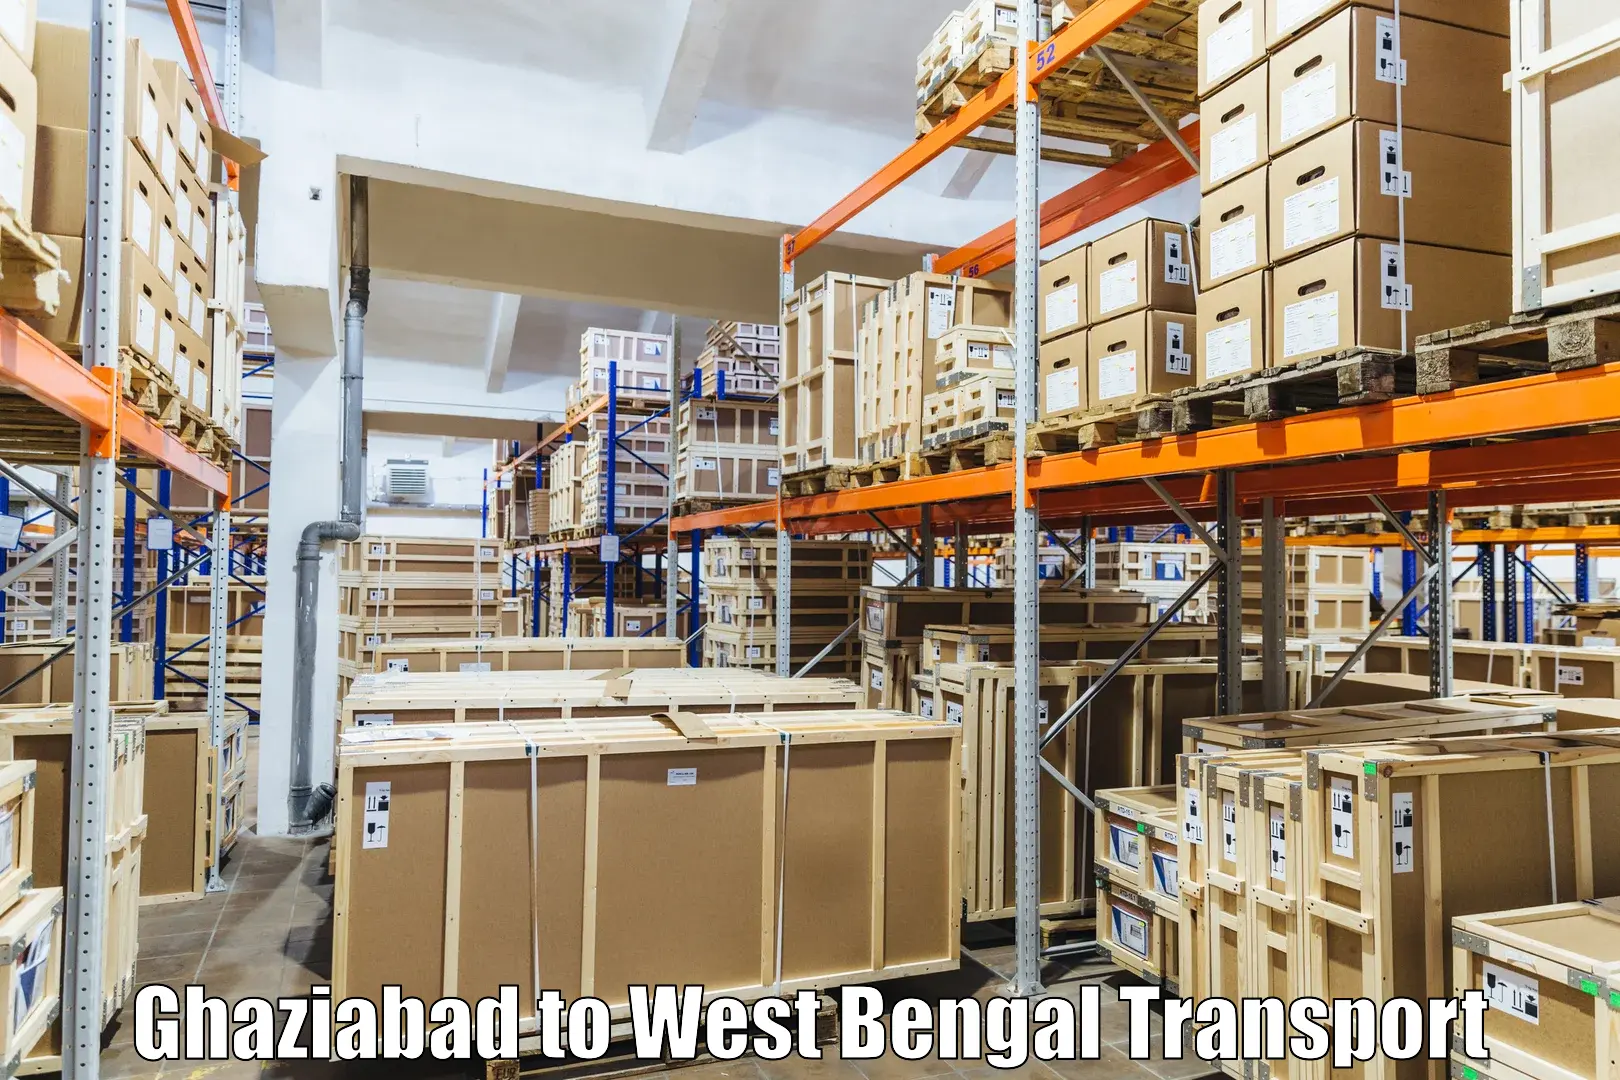 Land transport services in Ghaziabad to Barasat